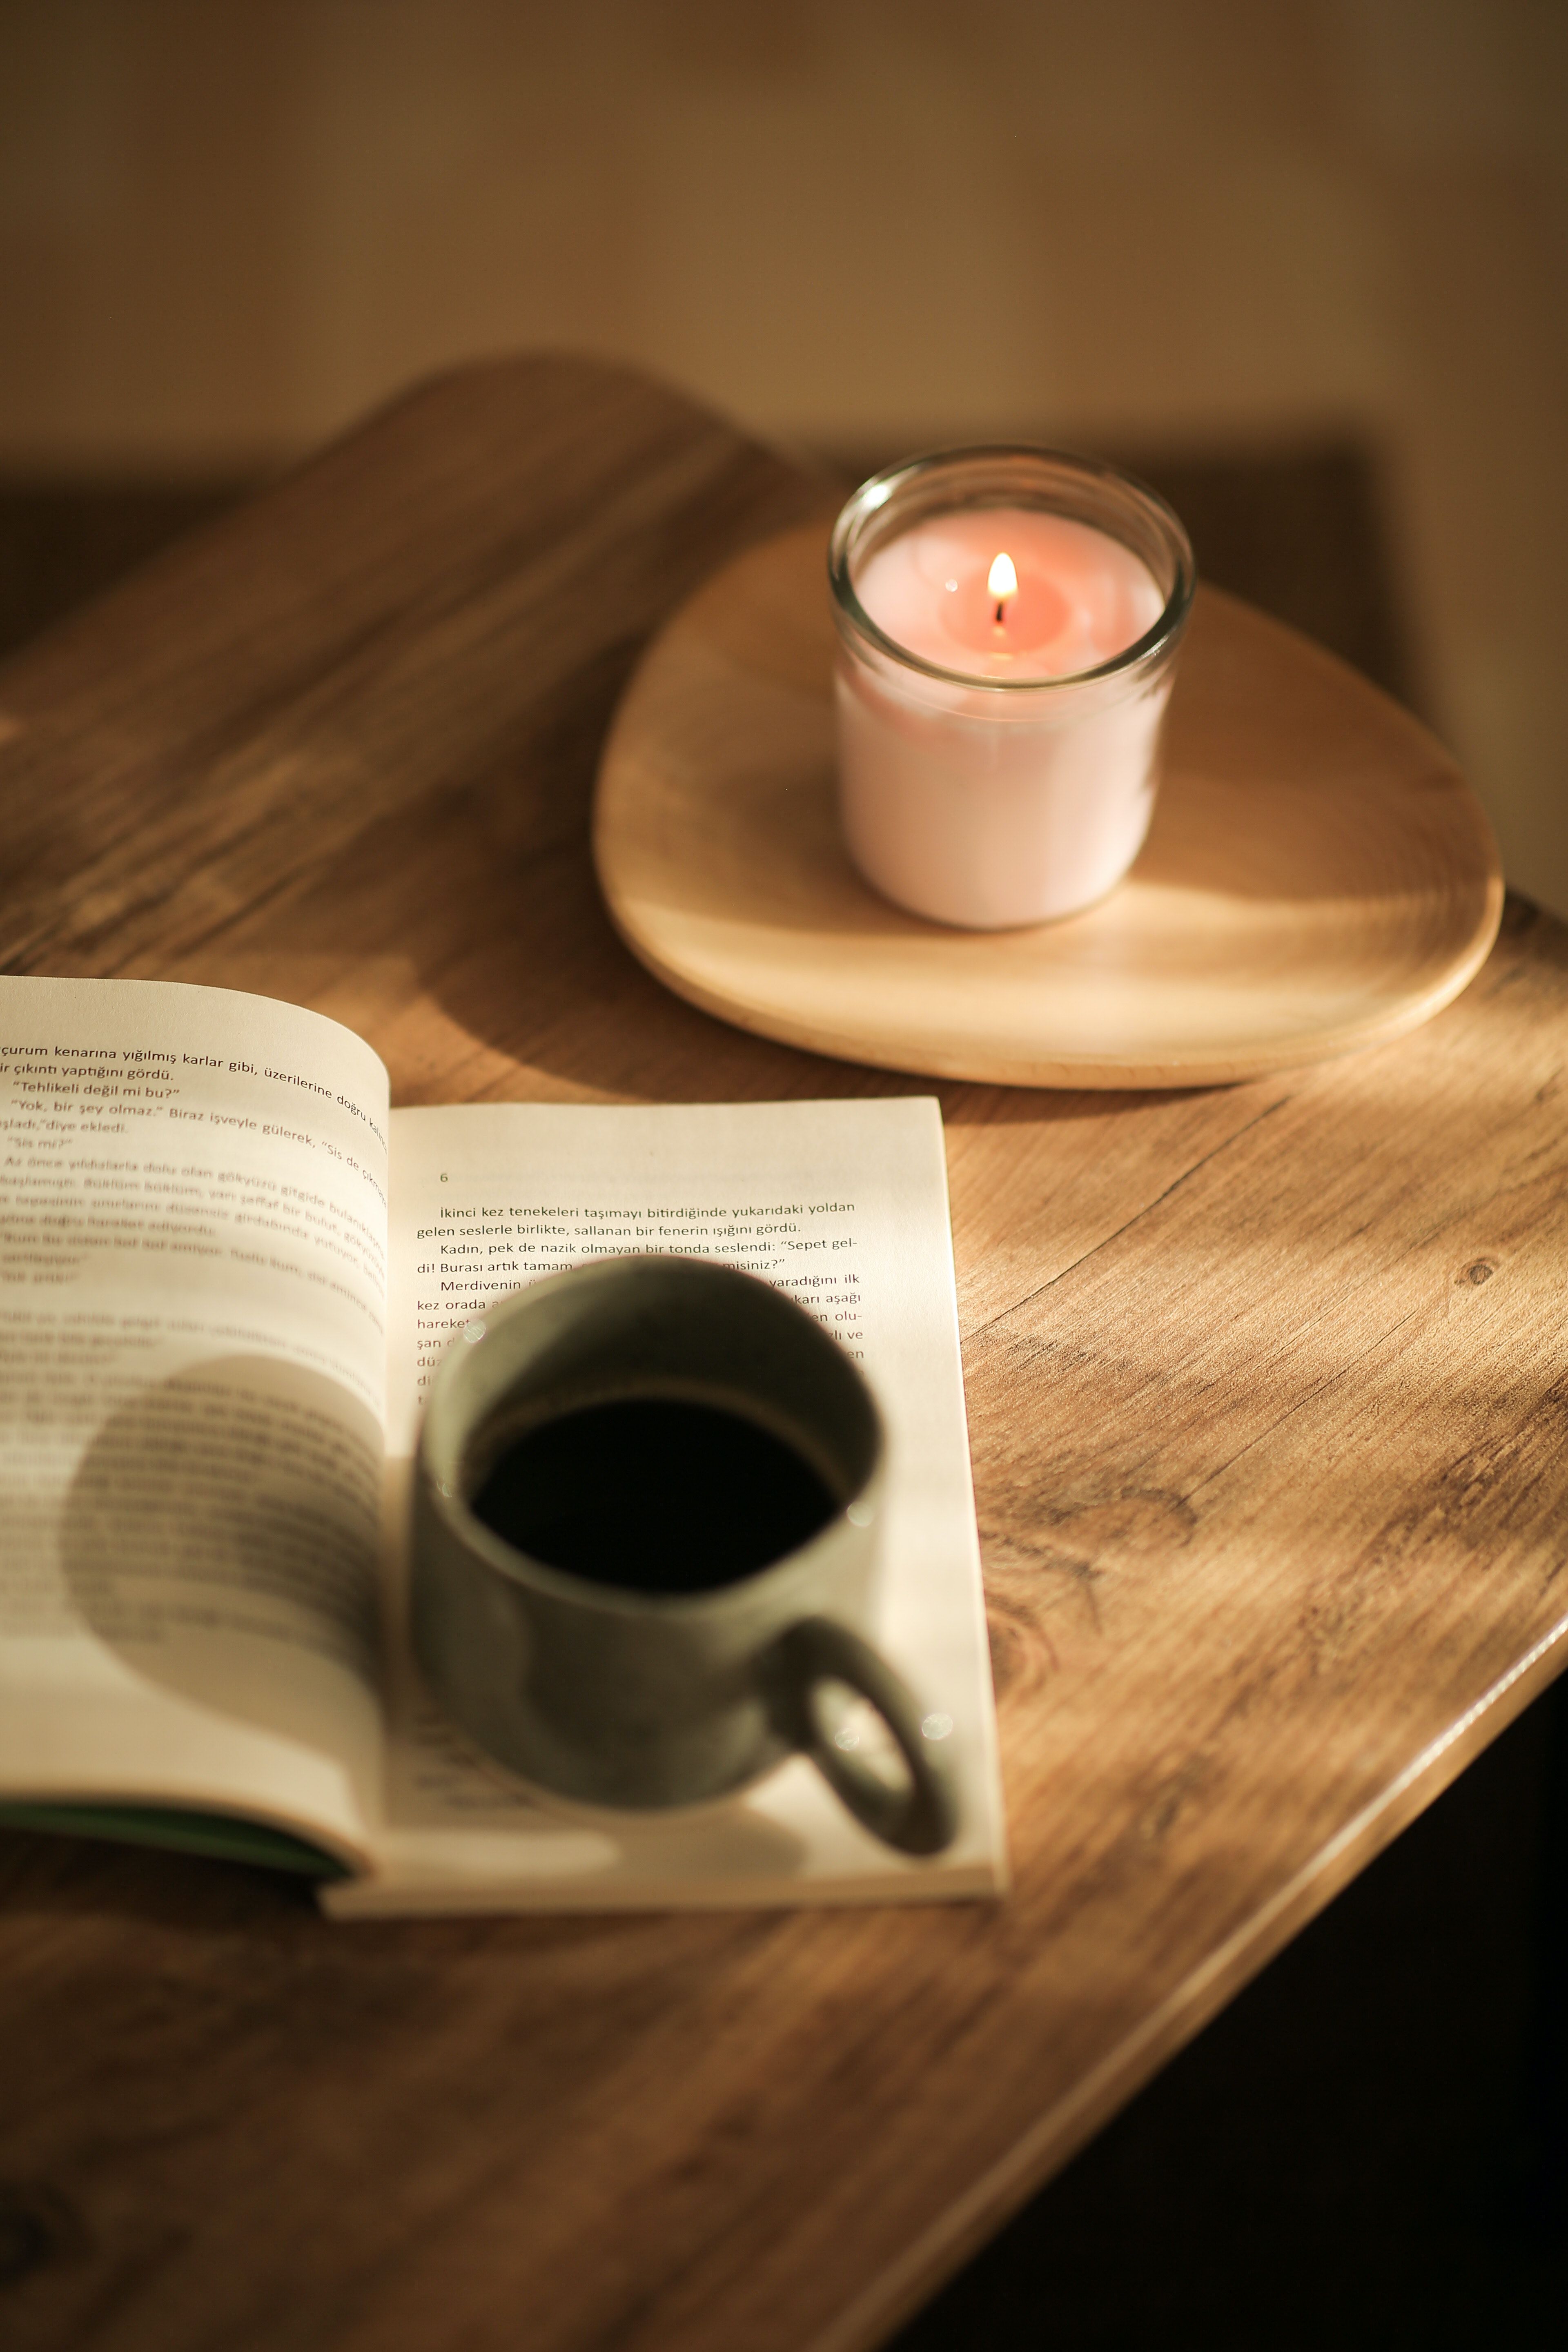 A book, a cup of coffee, and a candle on a table. - Books